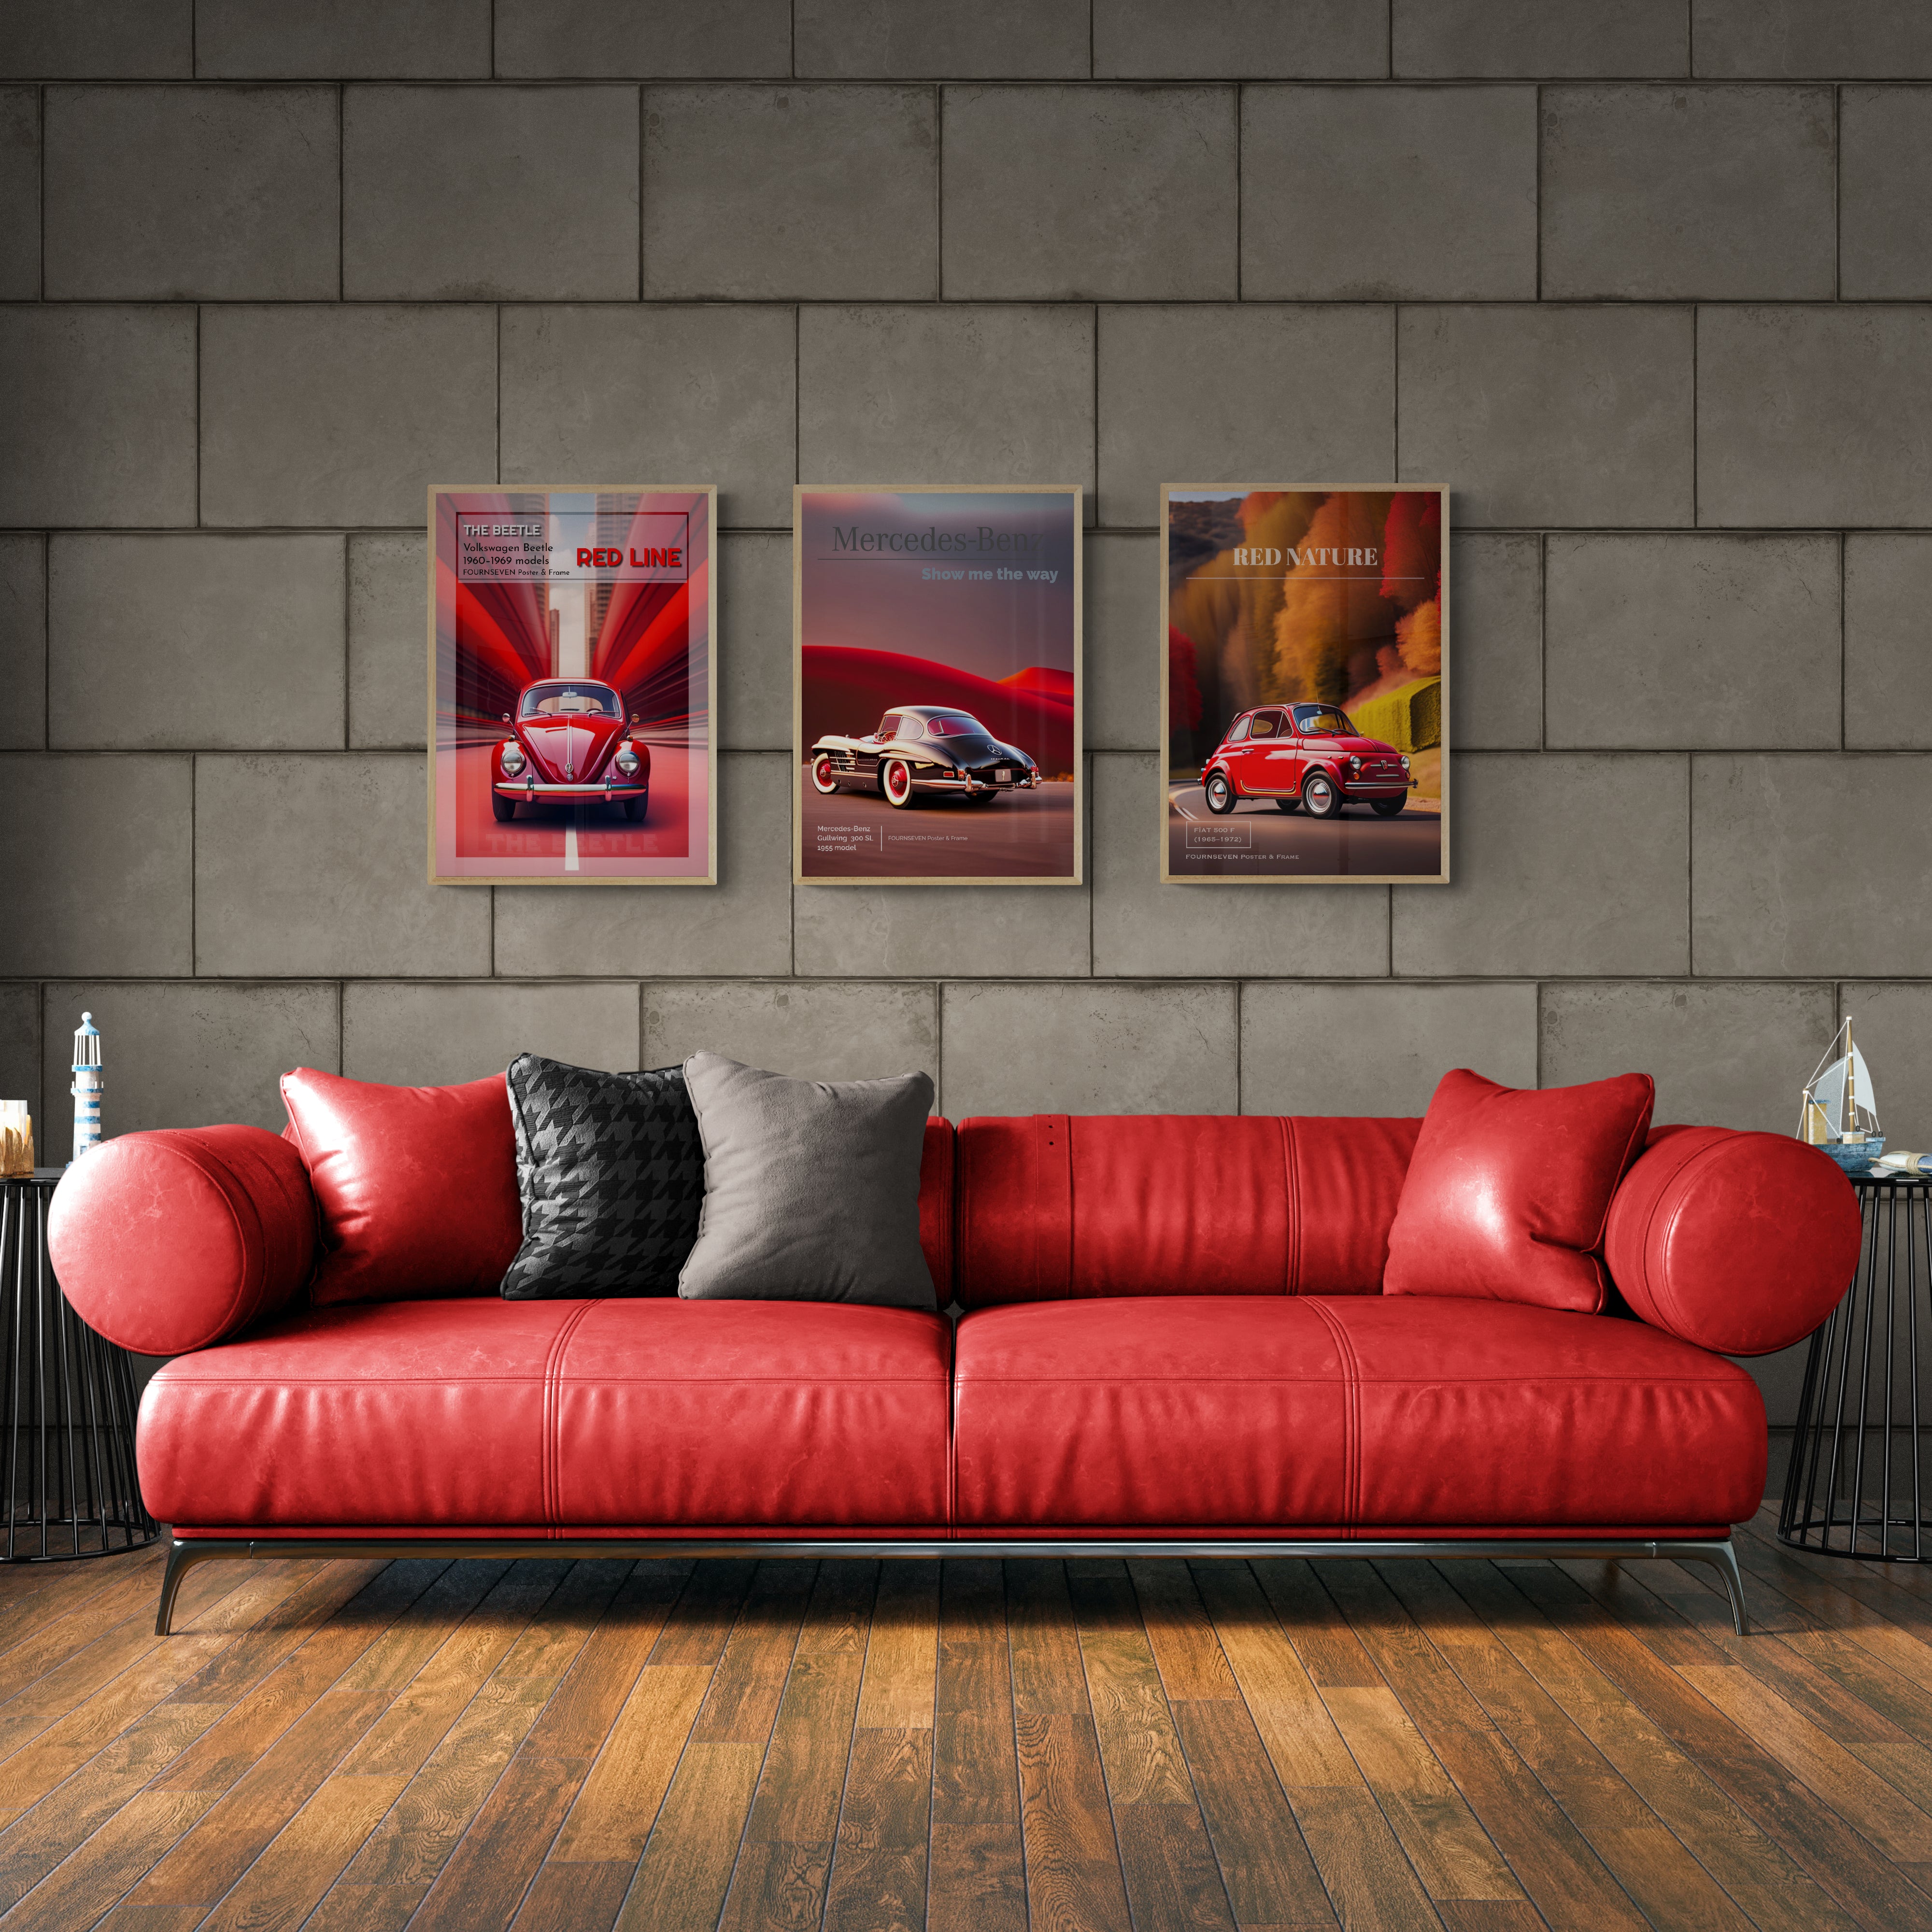 RED NATURE. FIAT 500F poster.